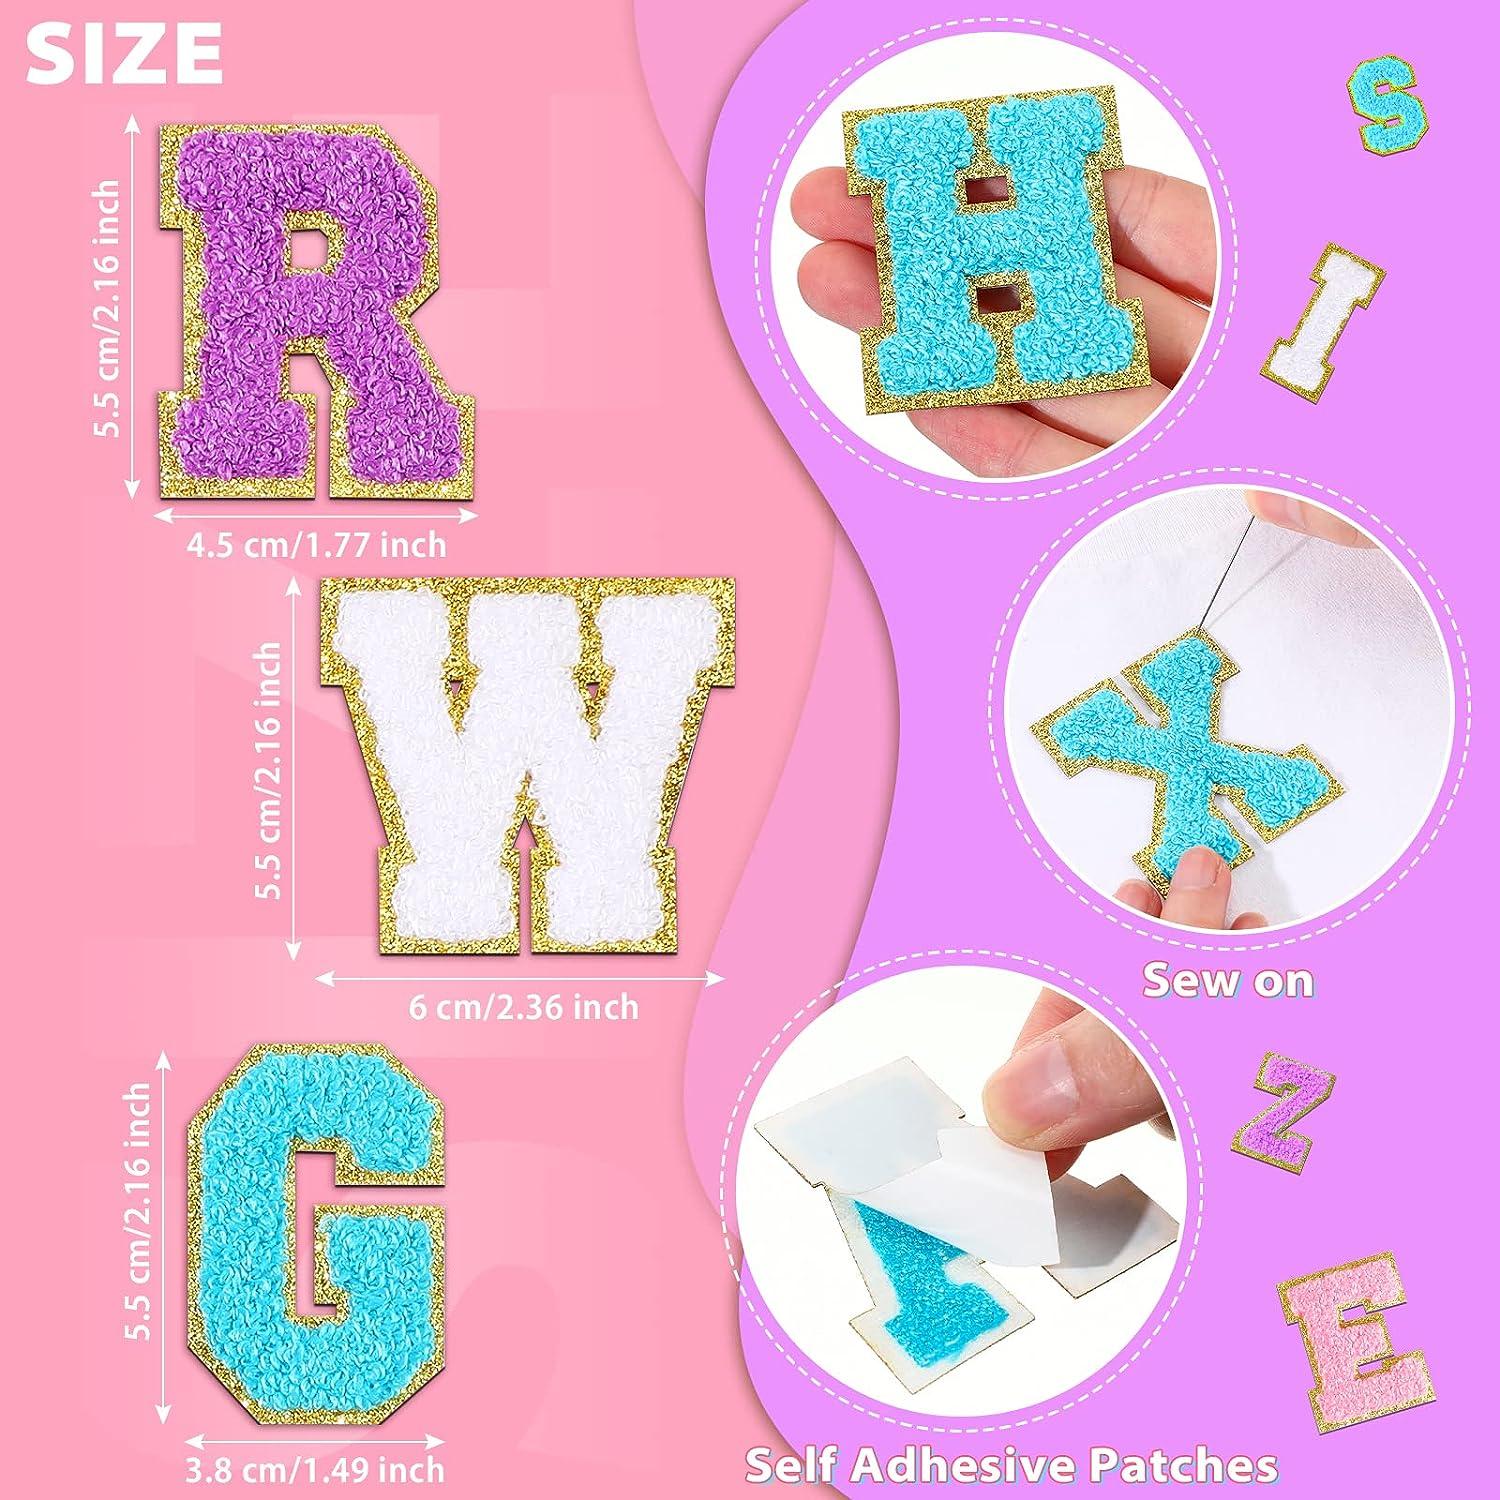  Letter Patches 6 Pcs Varsity Chenille Iron on Letters Patchs  for Clothing Jackets Backpacks Glitter Letter Patches(Purple,A) : Arts,  Crafts & Sewing